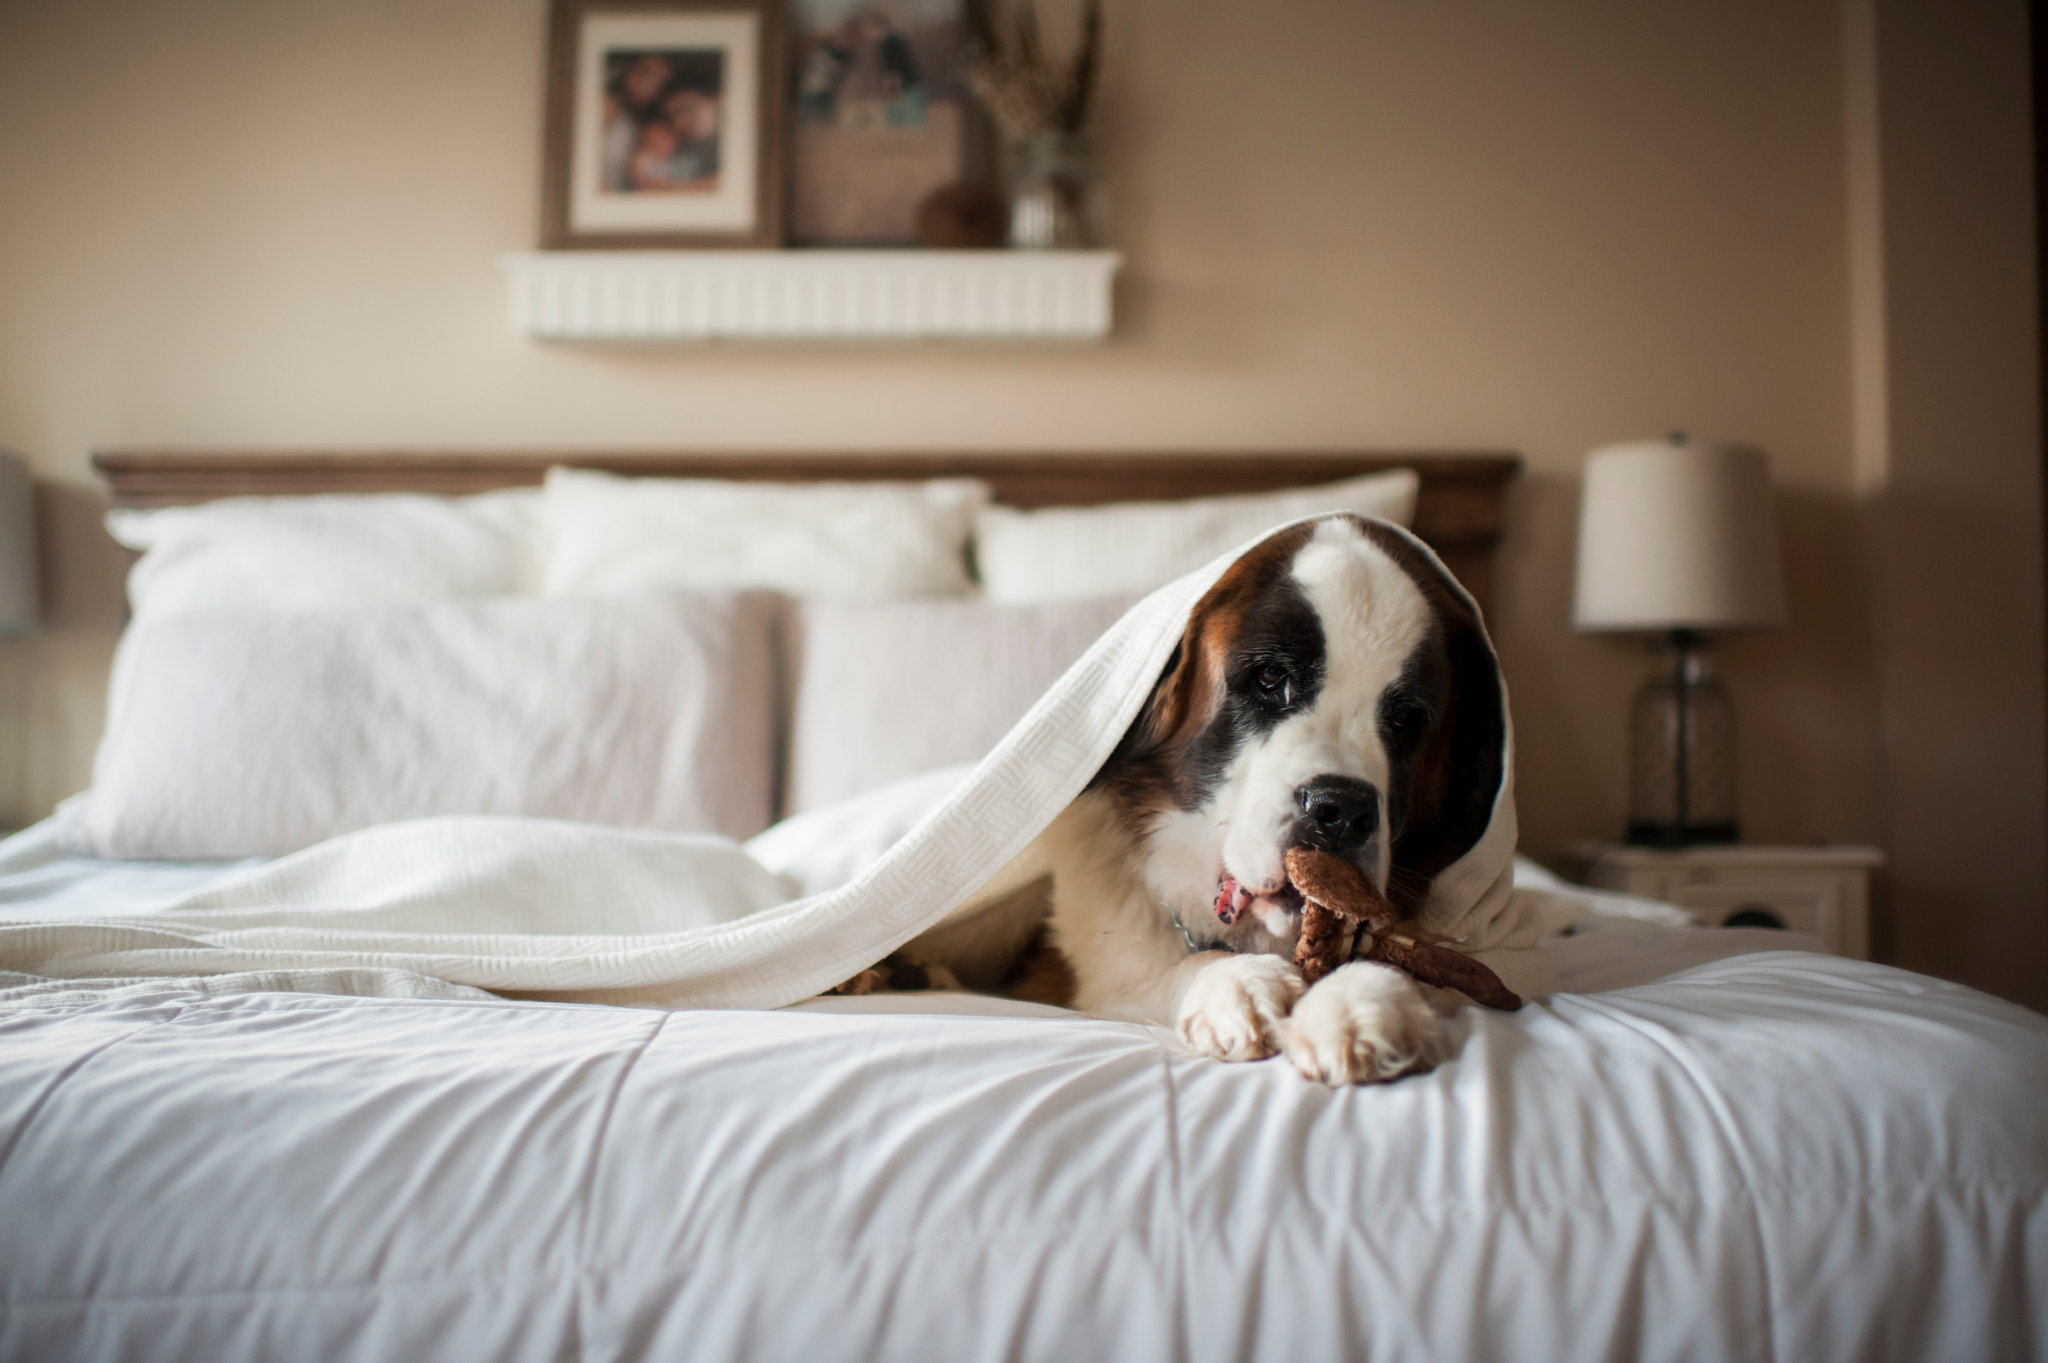 Maximizing Comfort And Hygiene: How Often Should You Change Bed Sheets?